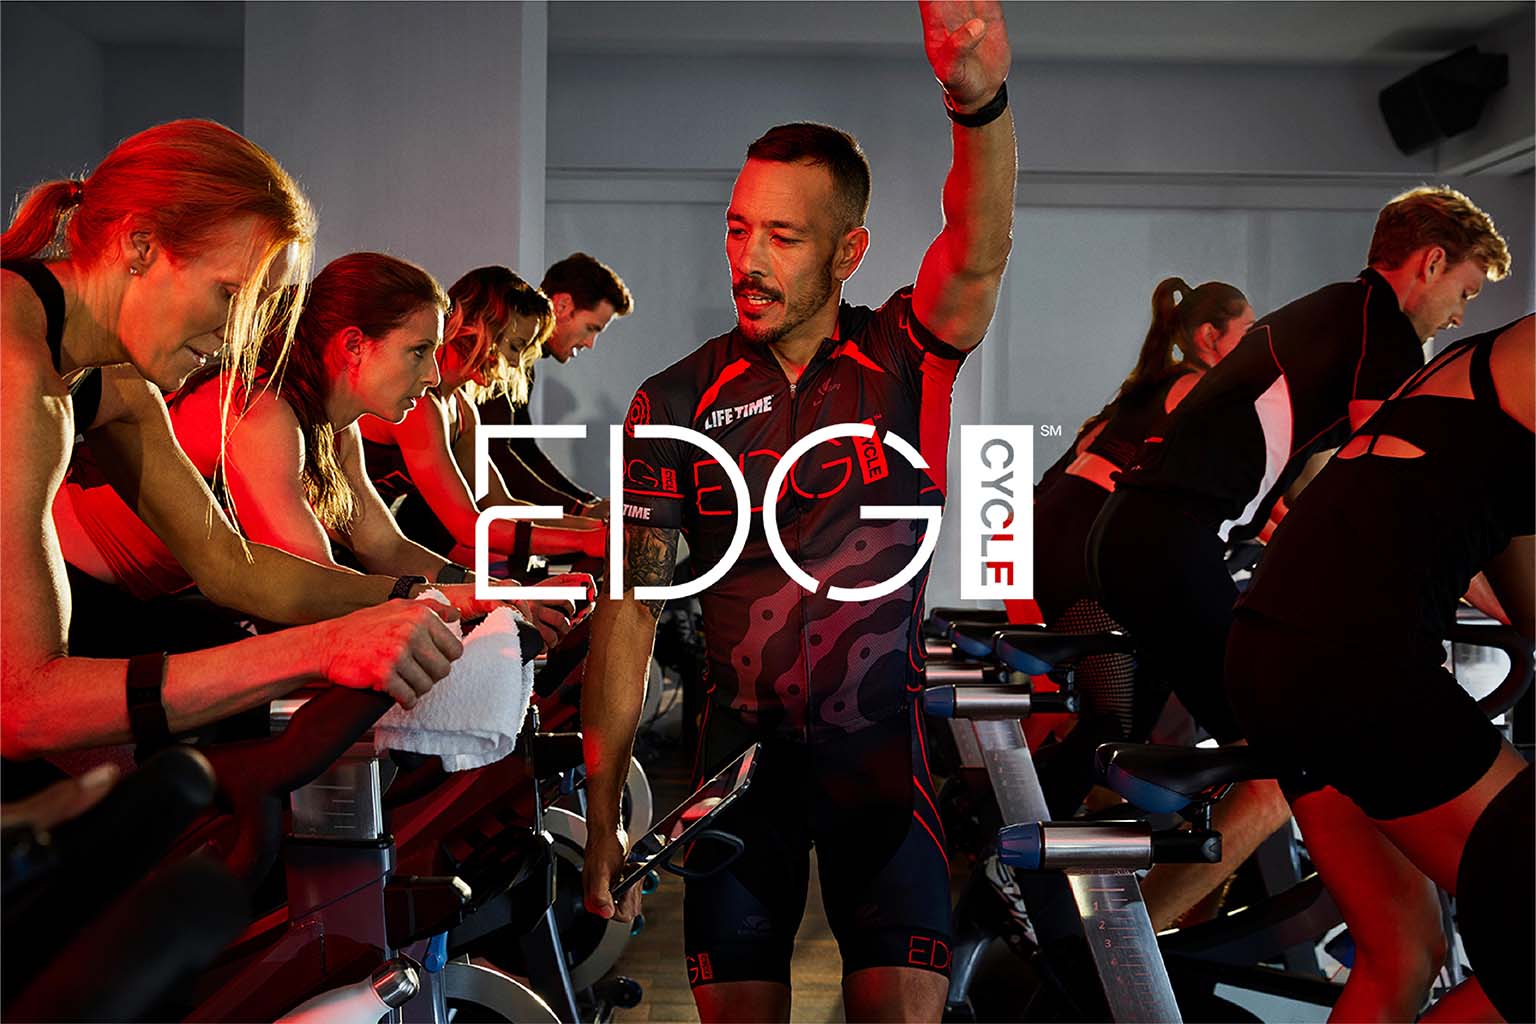 edge cycle class at life time